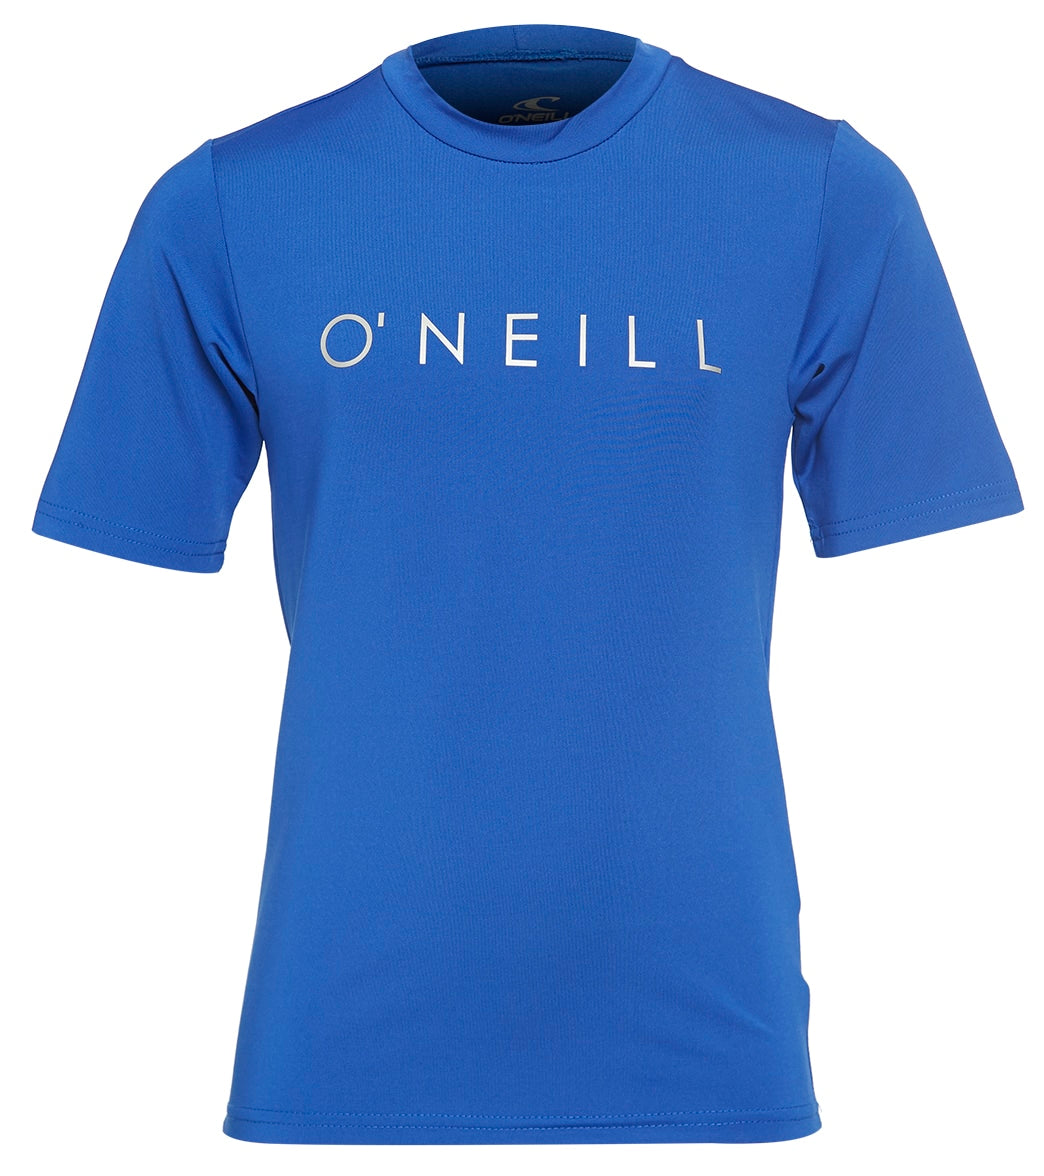 O'neill Youth Basic Upf 30+ Short Sleeve Sun Shirt - Pacific 4 Polyester - Swimoutlet.com